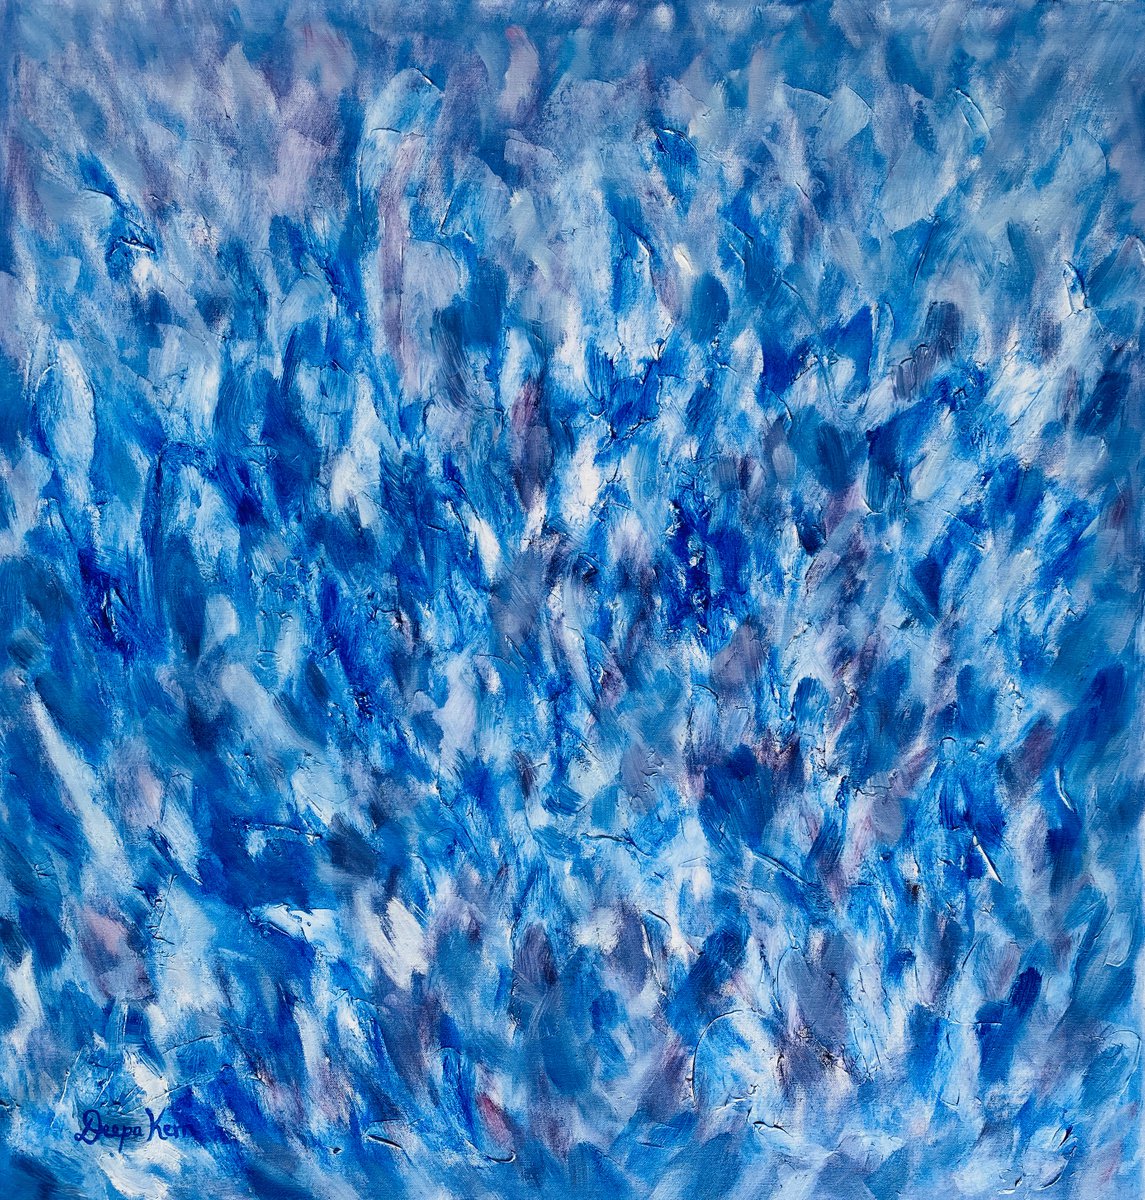 Cobalt Blue, Abstract Painting, Square by Deepa Kern